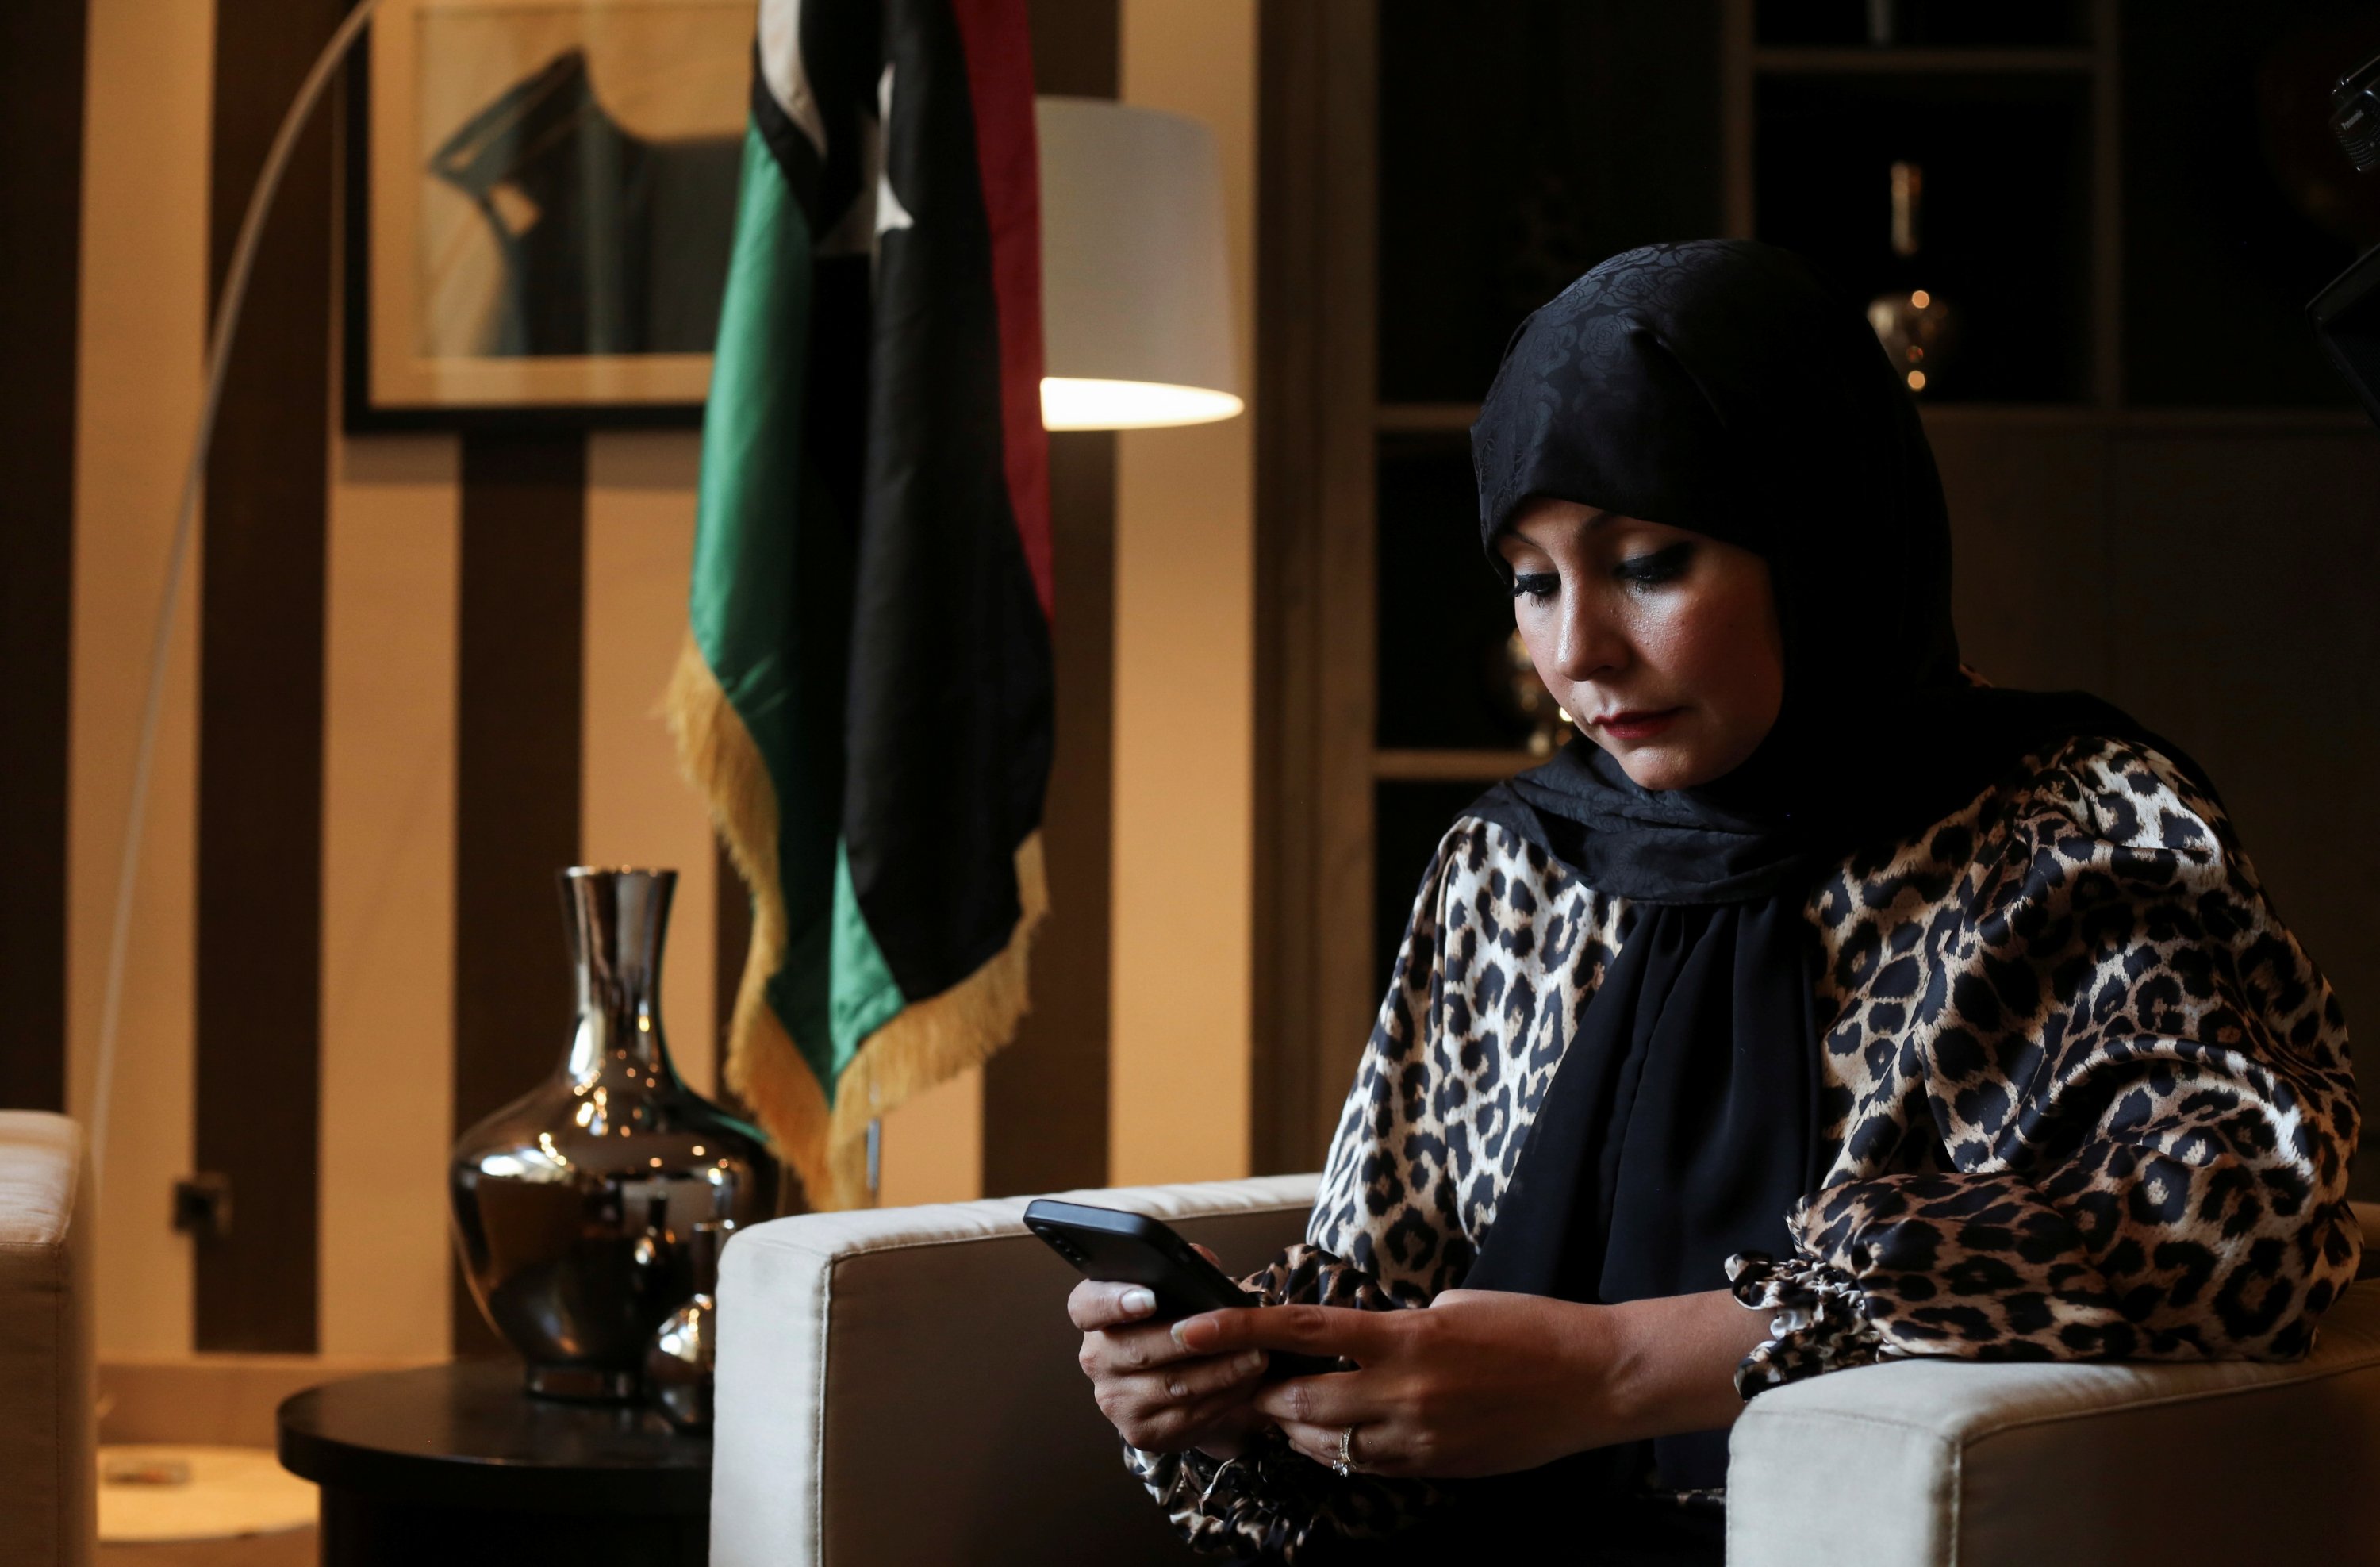 Hunaida Tumia, one of only two women to run in Libya's first presidential election, checks her phone during an interview with Reuters in Tripoli, Libya, on Dec. 1, 2021. (Reuters Photo)